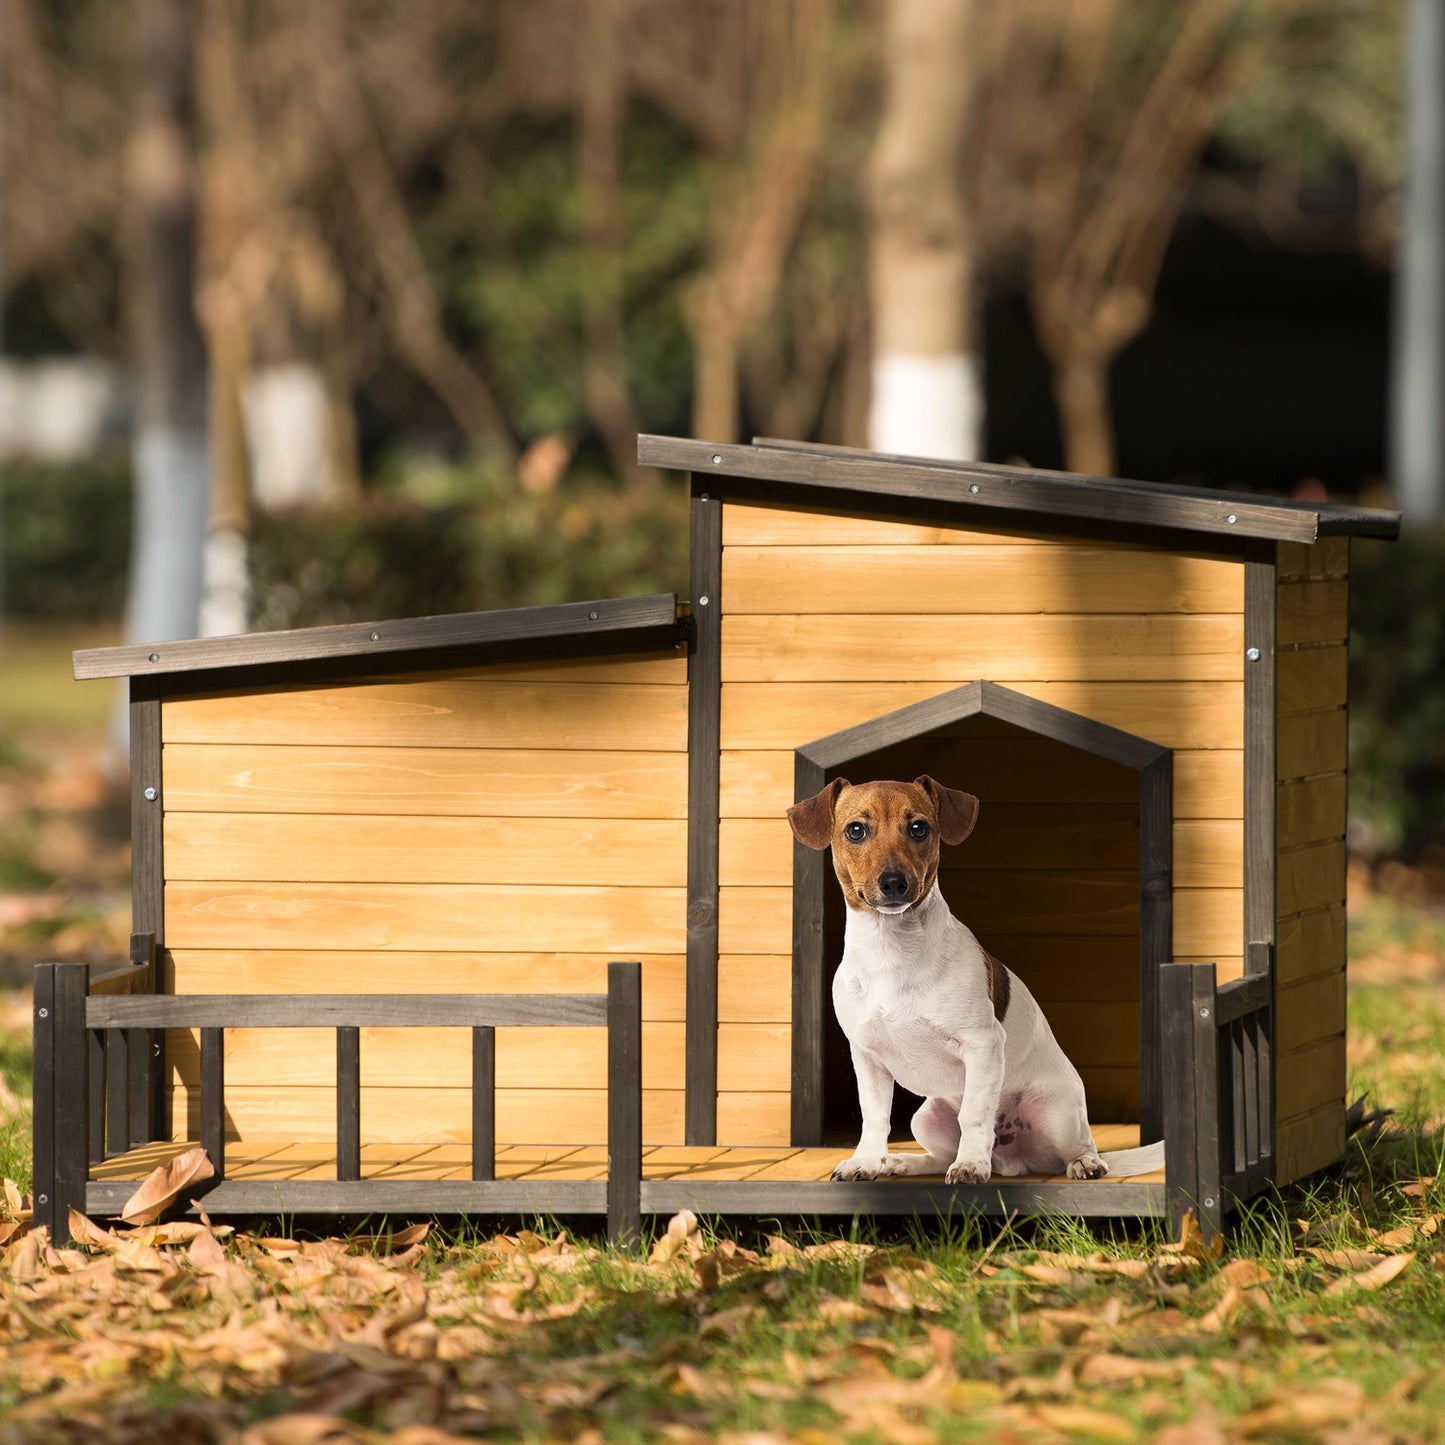 Baytocare 47.2" Large Wooden Dog House Outdoor, Indoor Dog Crate, Cabin Style, with Porch